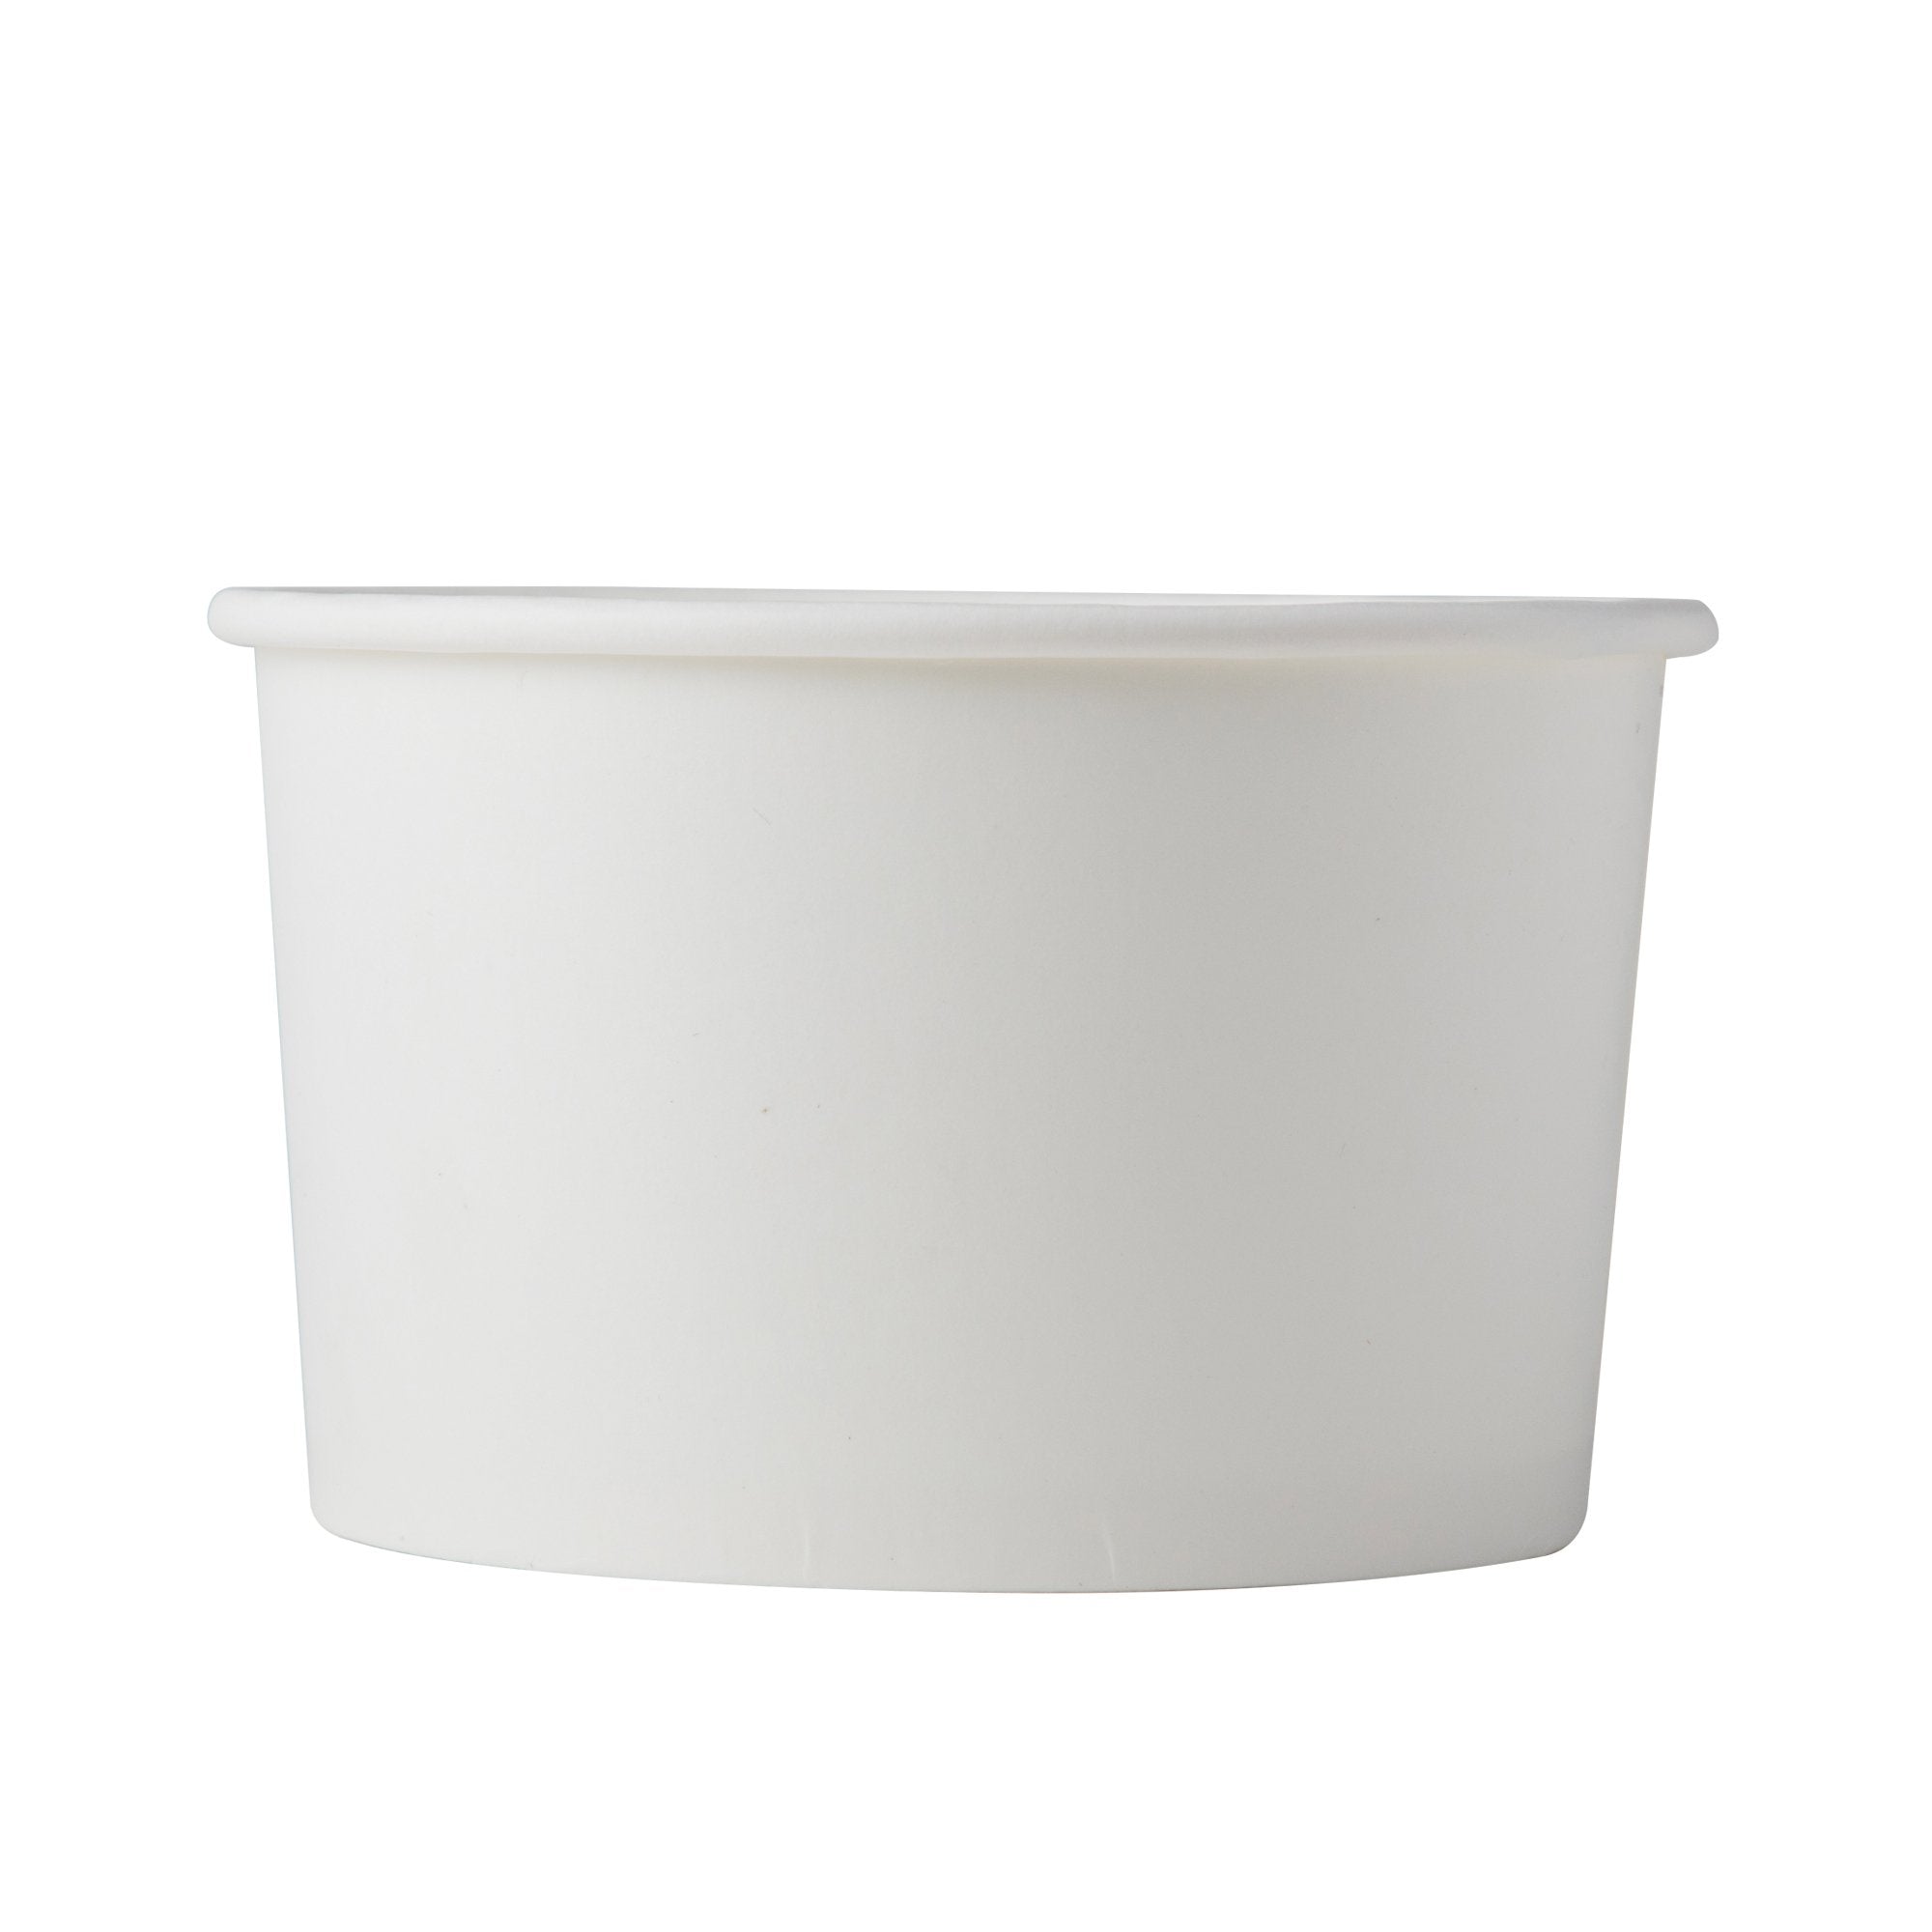 Choice 1/2 Gallon White Paper Frozen Yogurt / Food Cup with